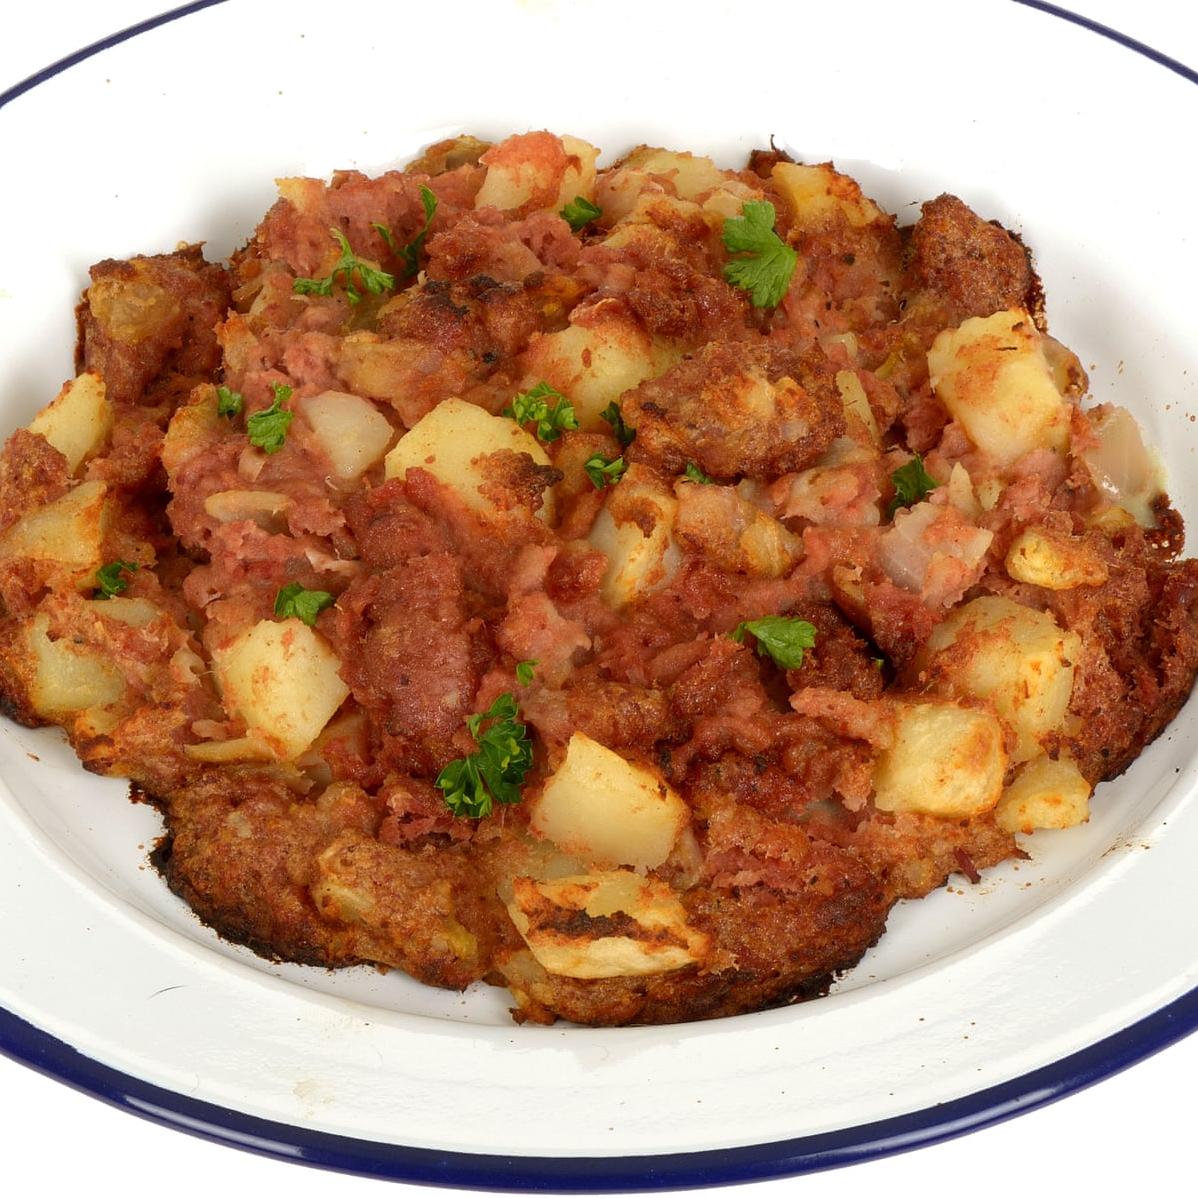  This easy and flavorful corned beef hash requires minimal prep and is made with staple ingredients.